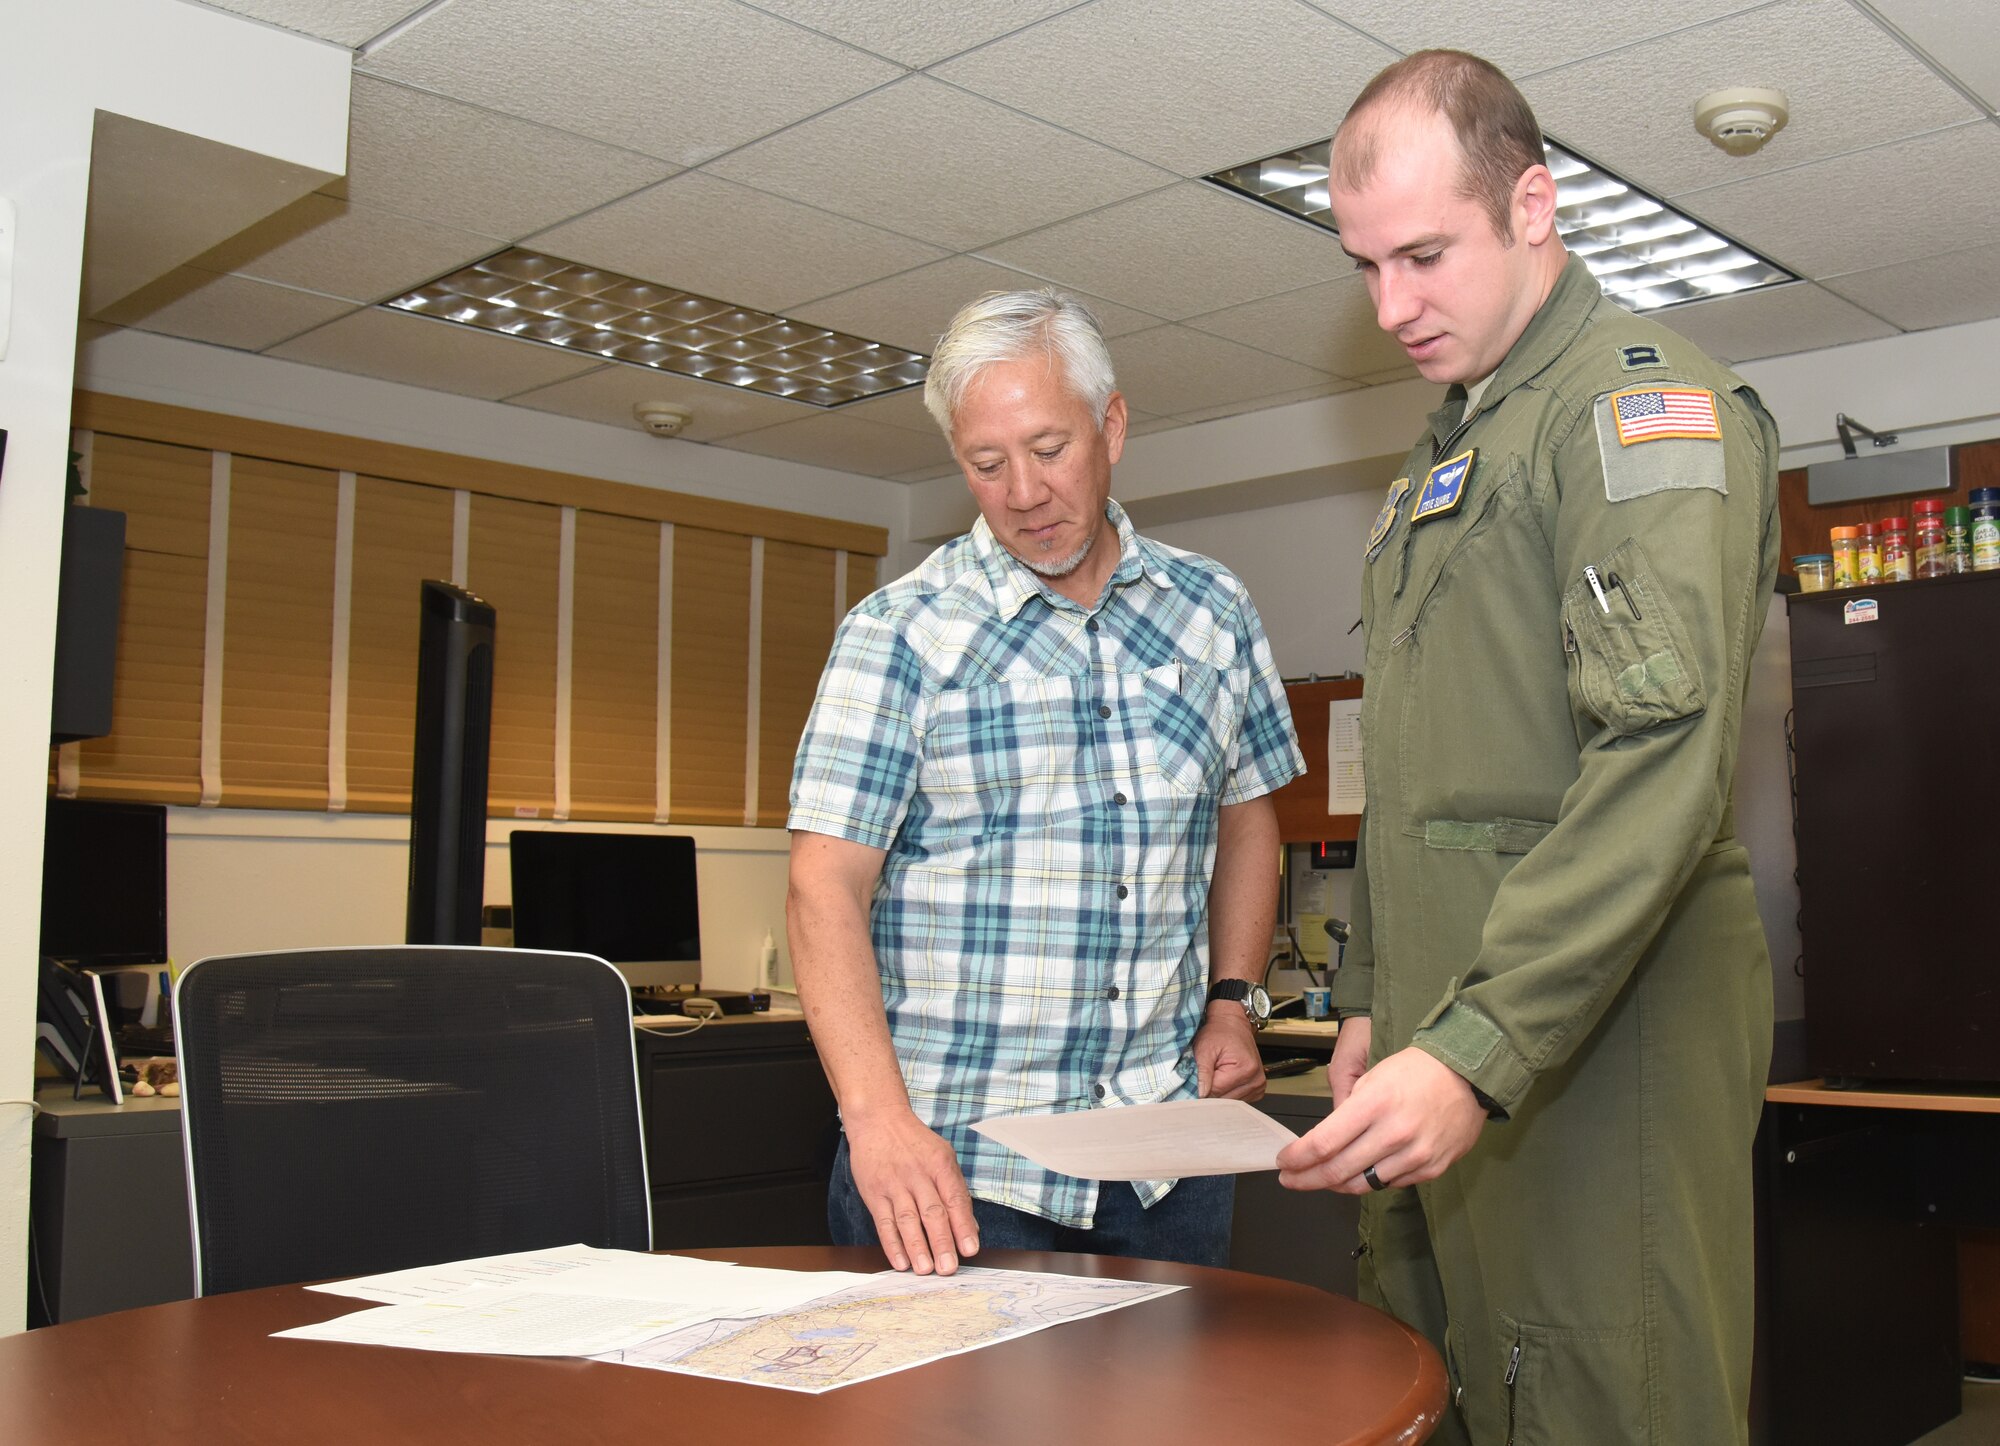 Flight planner goes over mission with pilot.